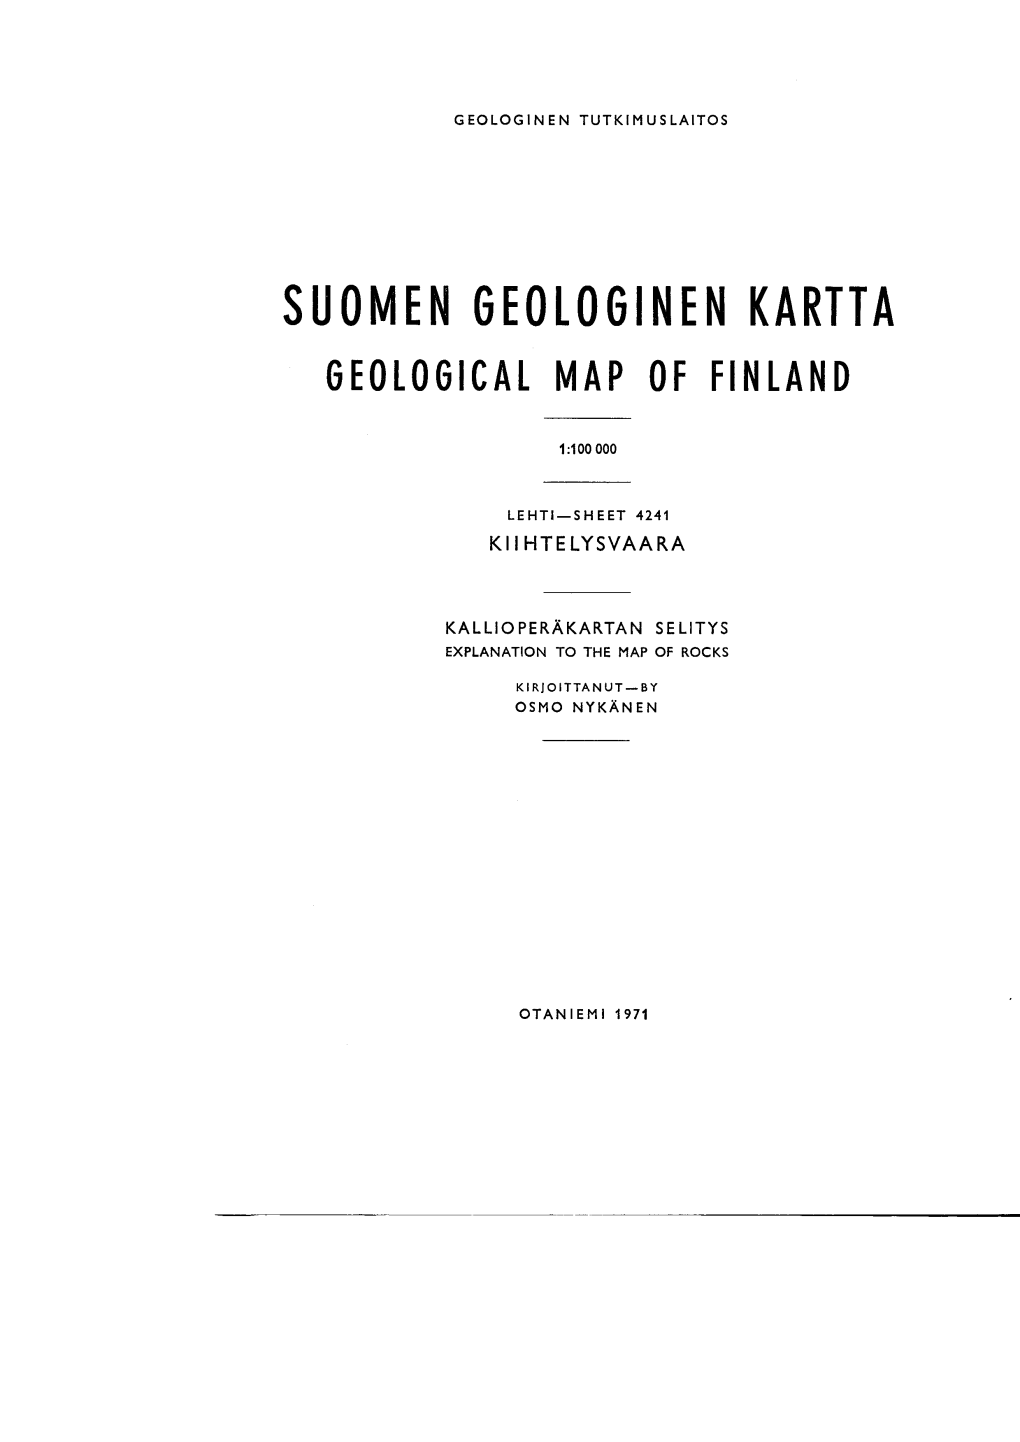 Geological Map of Finland